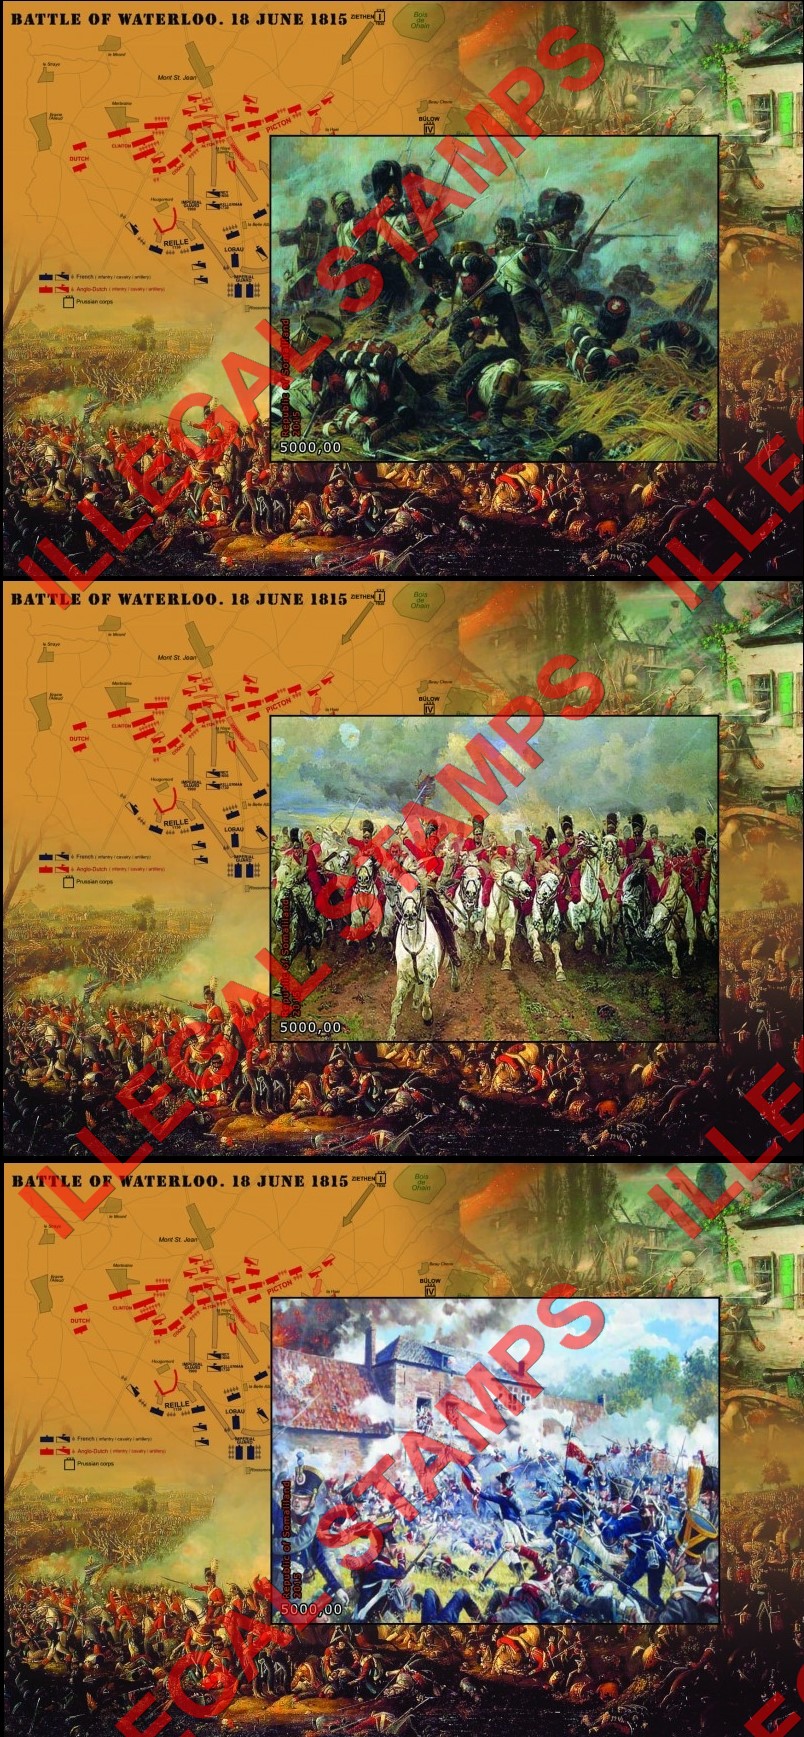 Somaliland 2015 Battle of Waterloo Illegal Stamp Souvenir Sheets of 1 (Part 3)